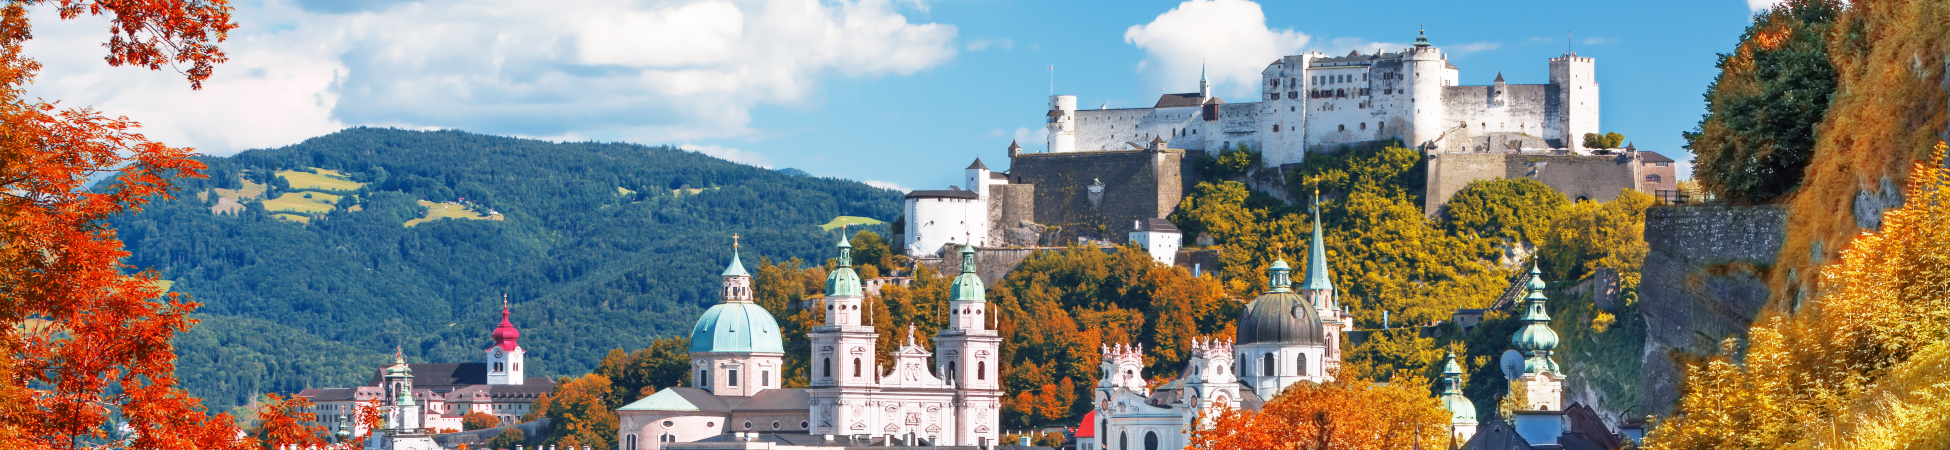 scenic summer autumn view on a city Salzburg skyline with mountains in the background